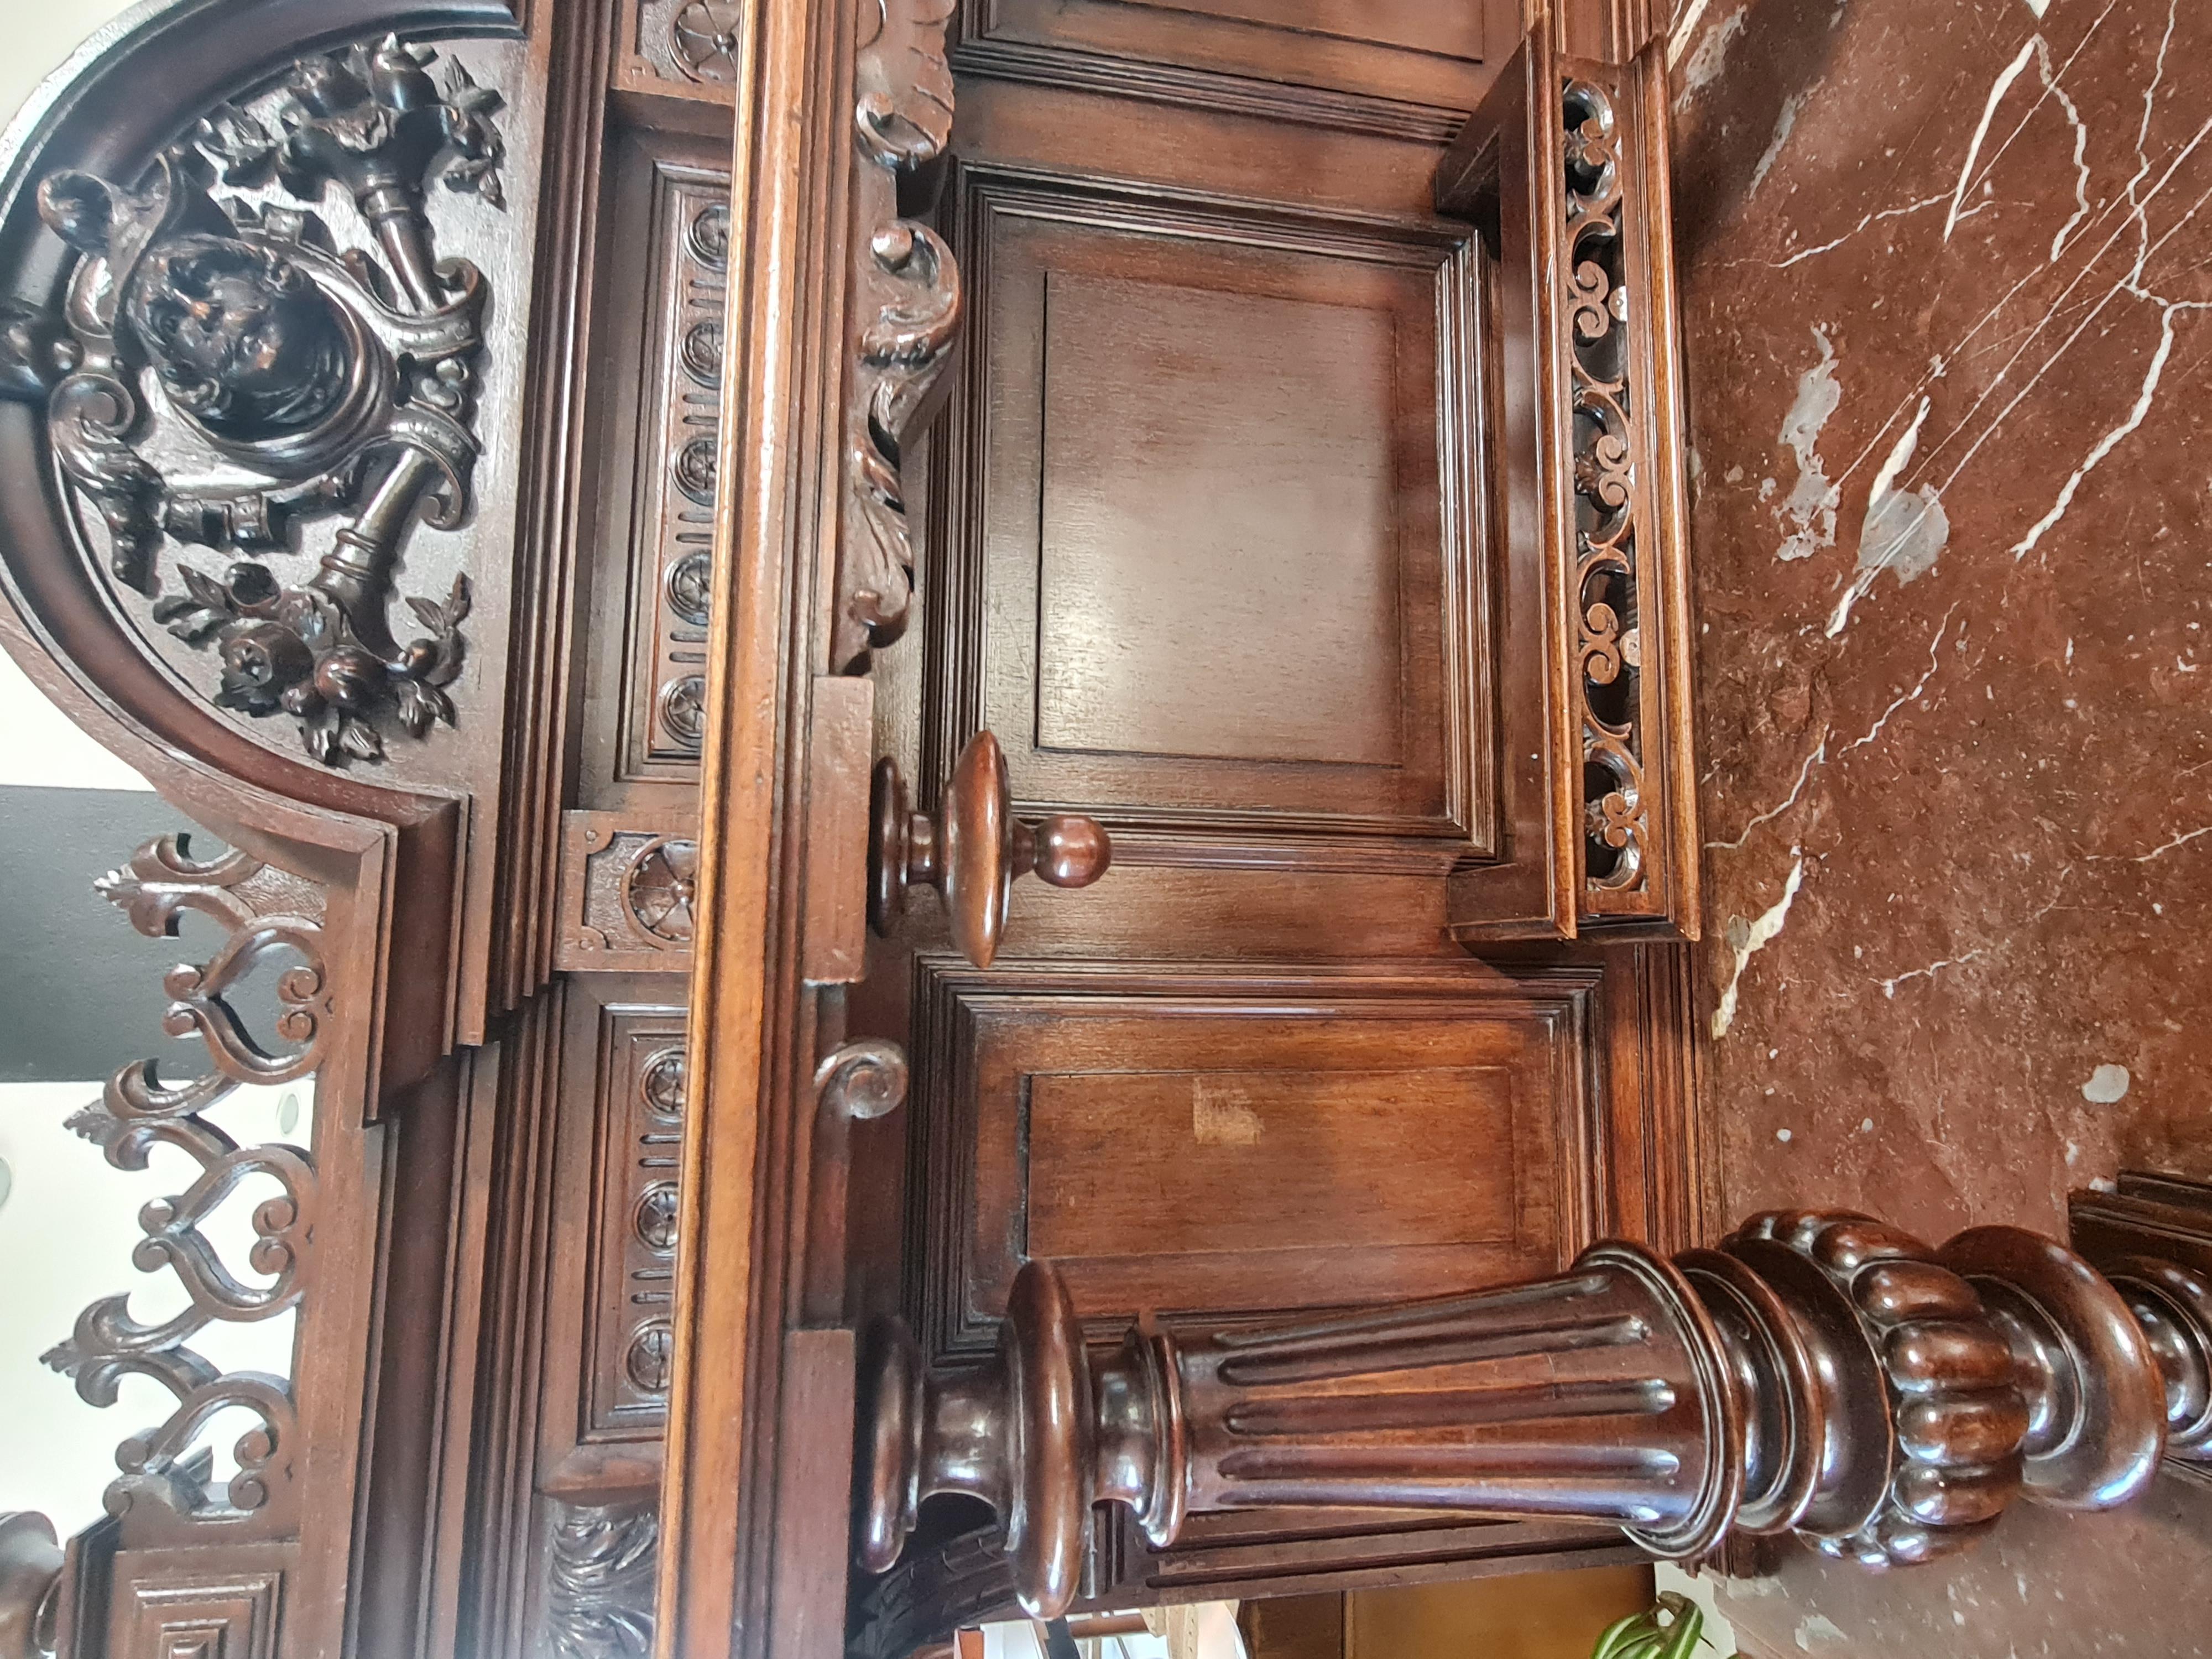 We present to you this special cupboard ,aptly decorated with rich carvings in Renaissance style 
With its elegant silhouette and beautiful patina, this 19th century Renaissance piqce of funiture will make a beautiful decorative addition to any